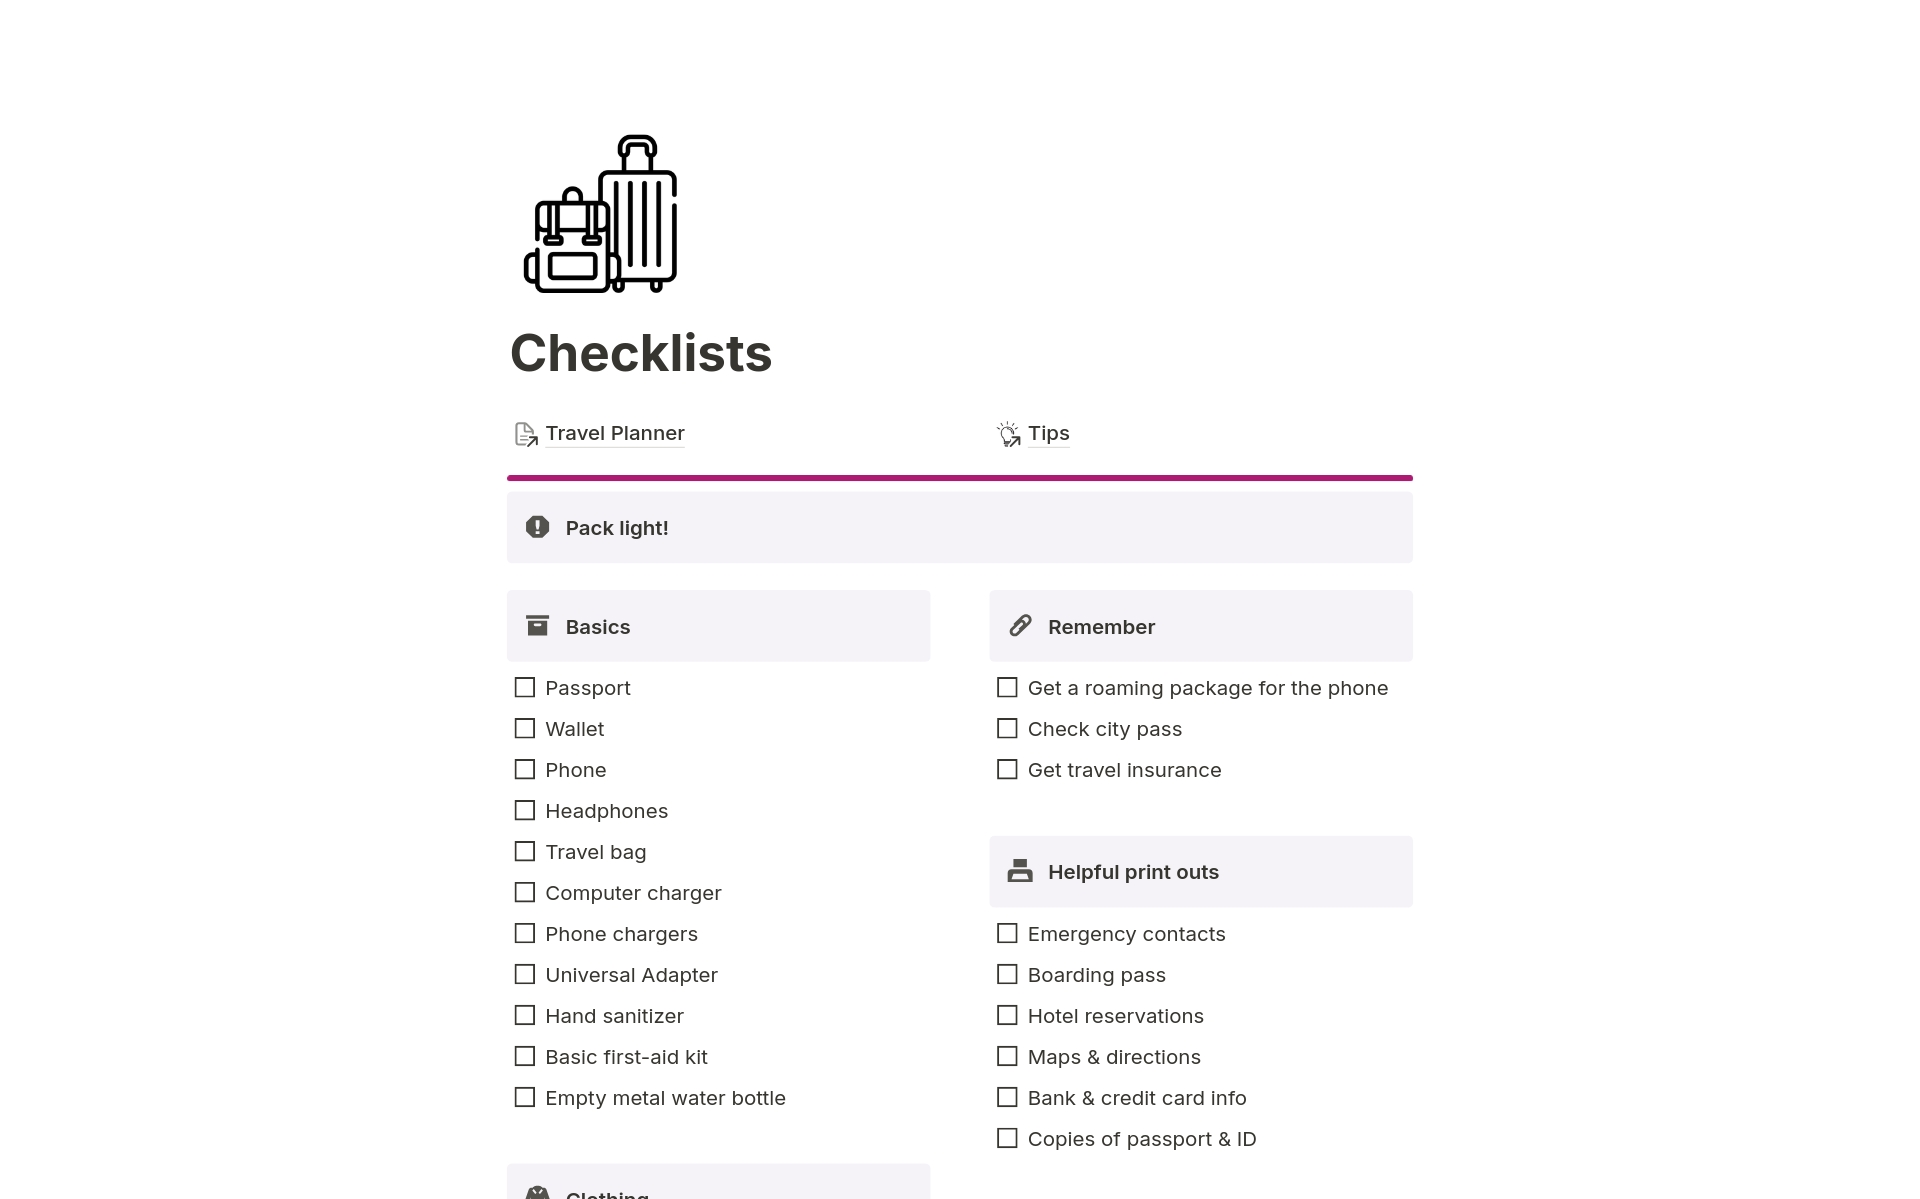 This template features six activity categories for easy planning, including databases for tracking places and trips, an itinerary page, packing checklists, and a trip tips section to enhance your travel experience.